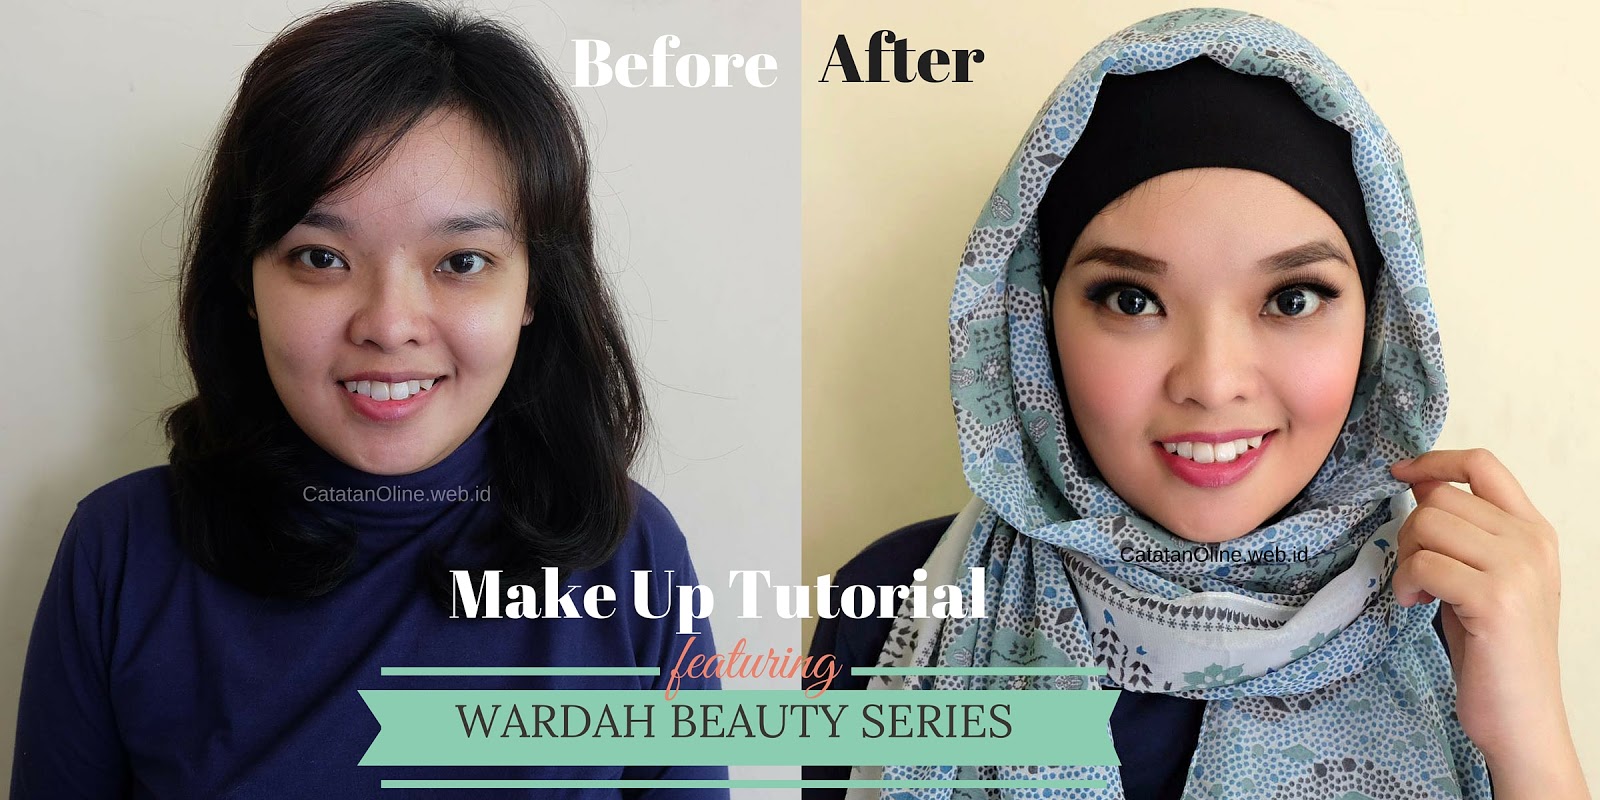 Tutorial Make Up No Make Up For Idul Fitri With Wardah Beauty